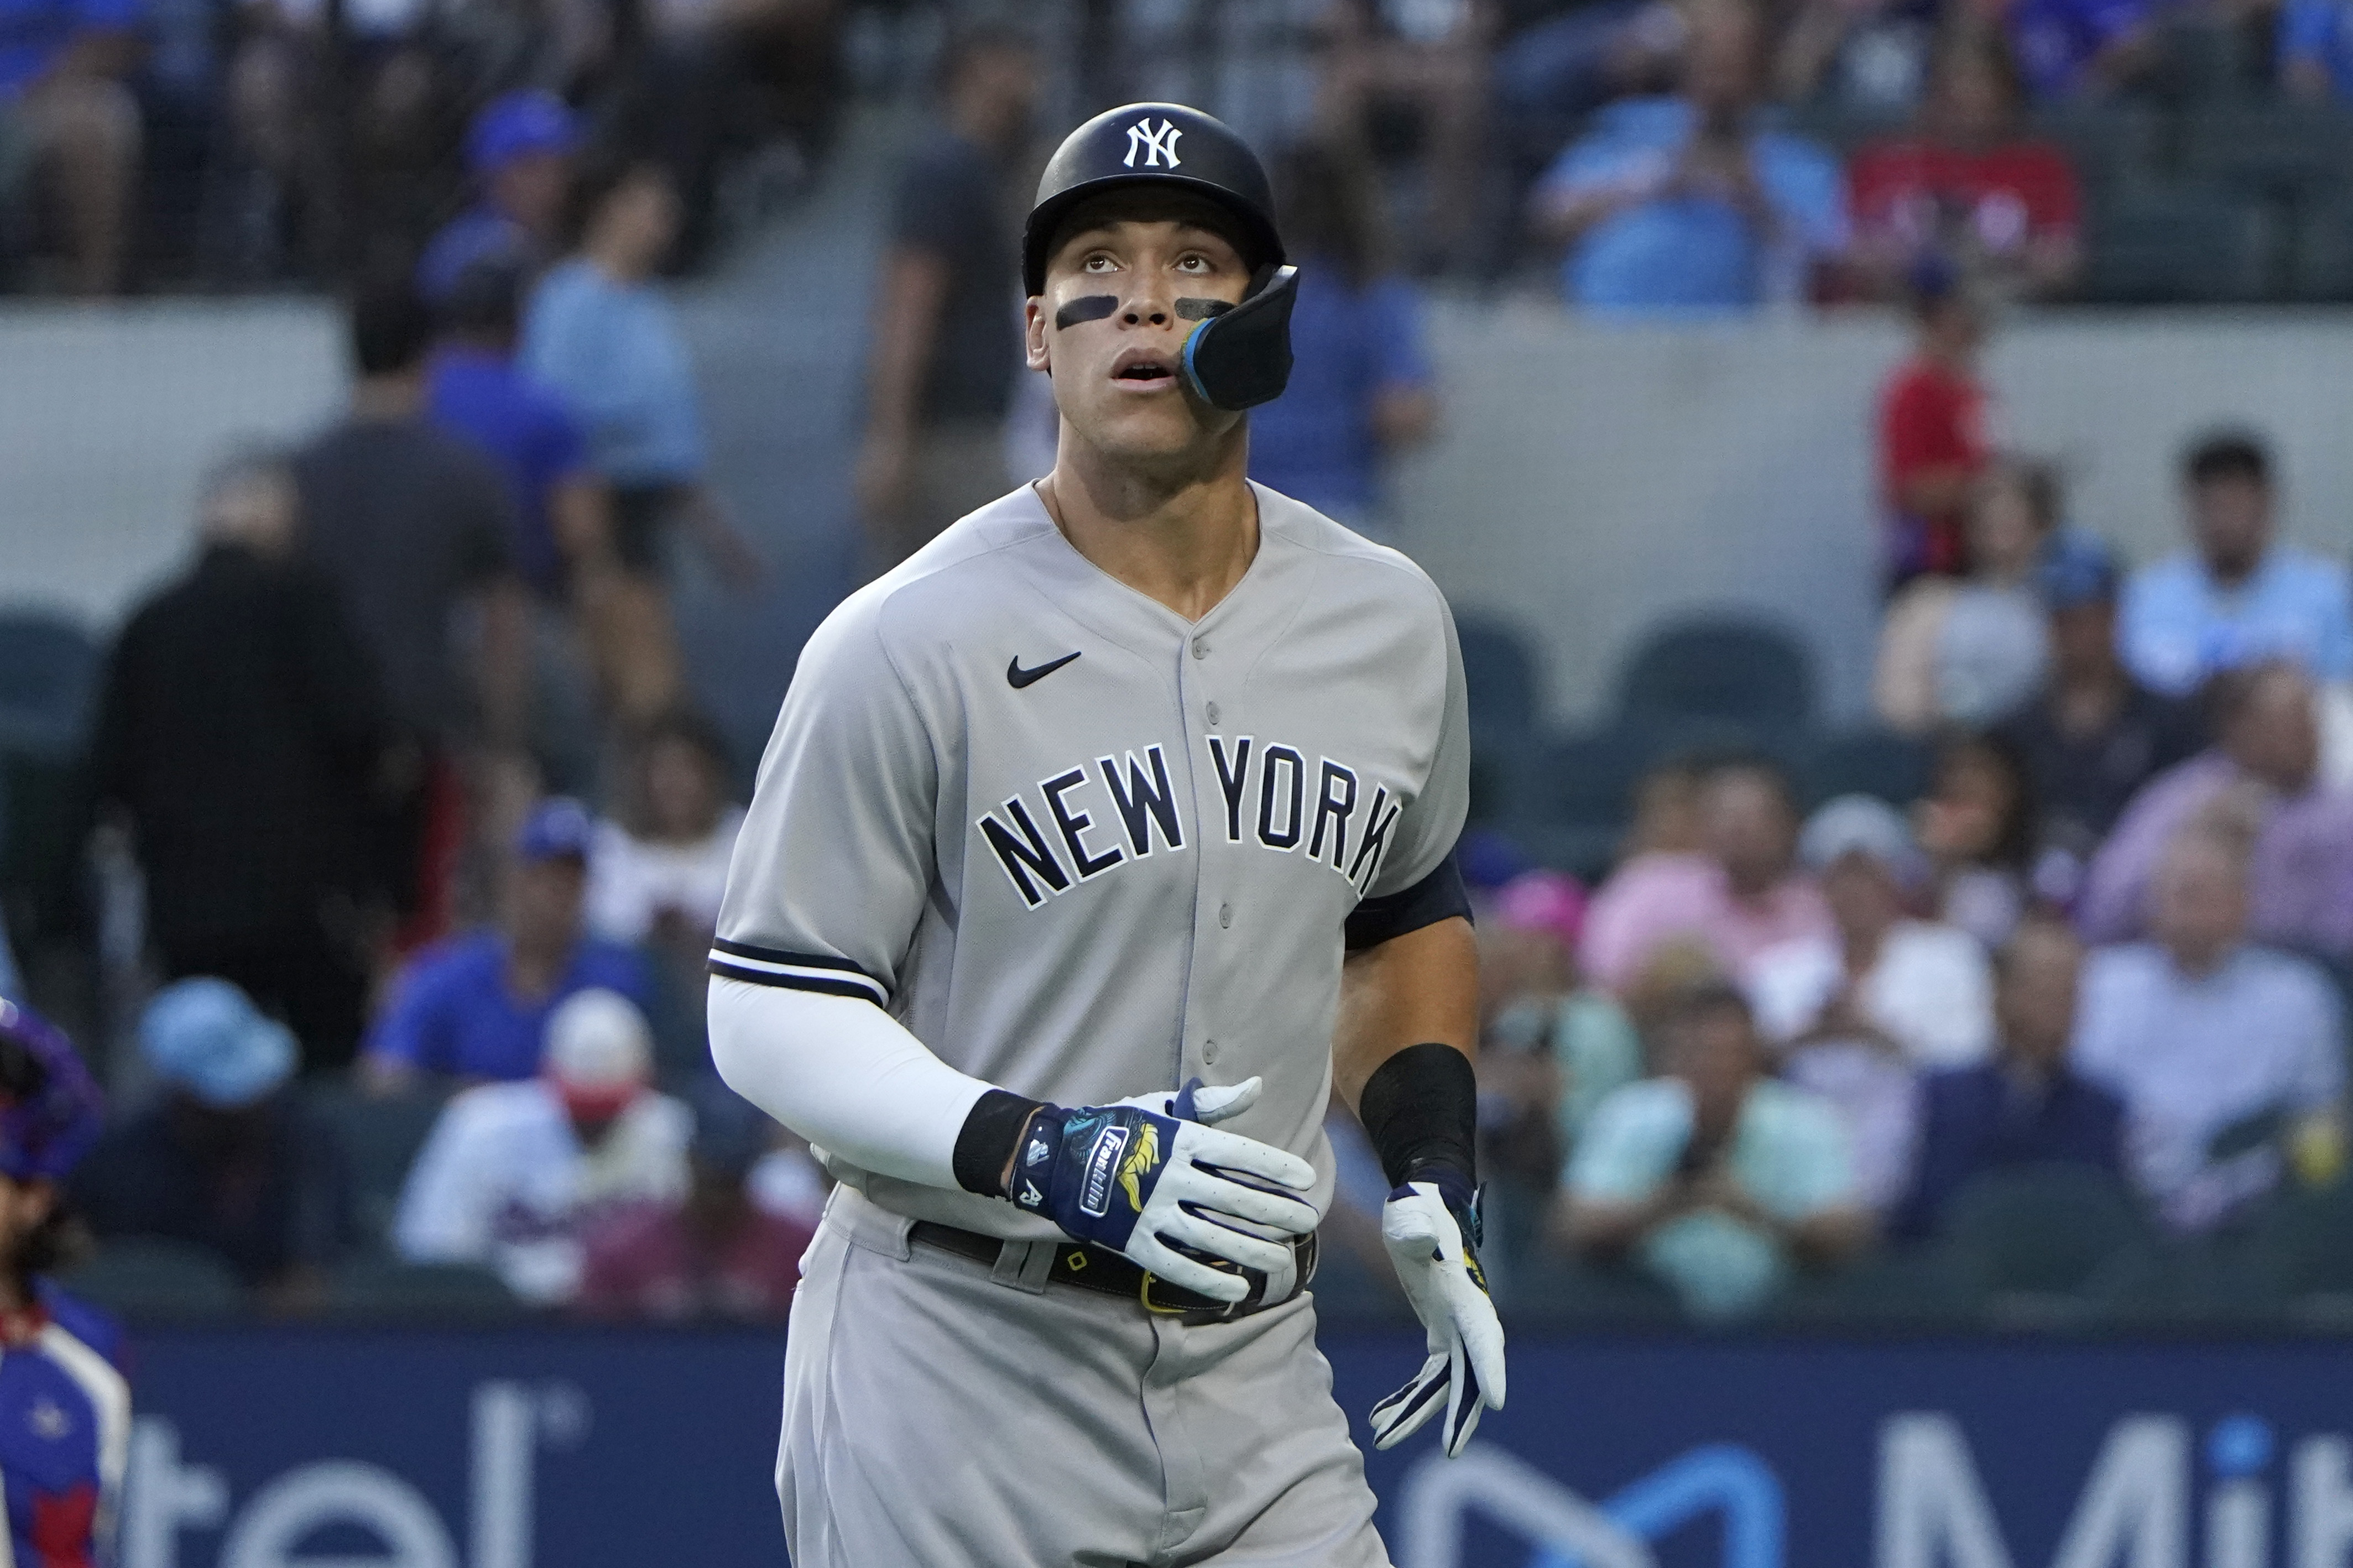 TO BE GREAT!: PART 3 – AaRON JUDGE